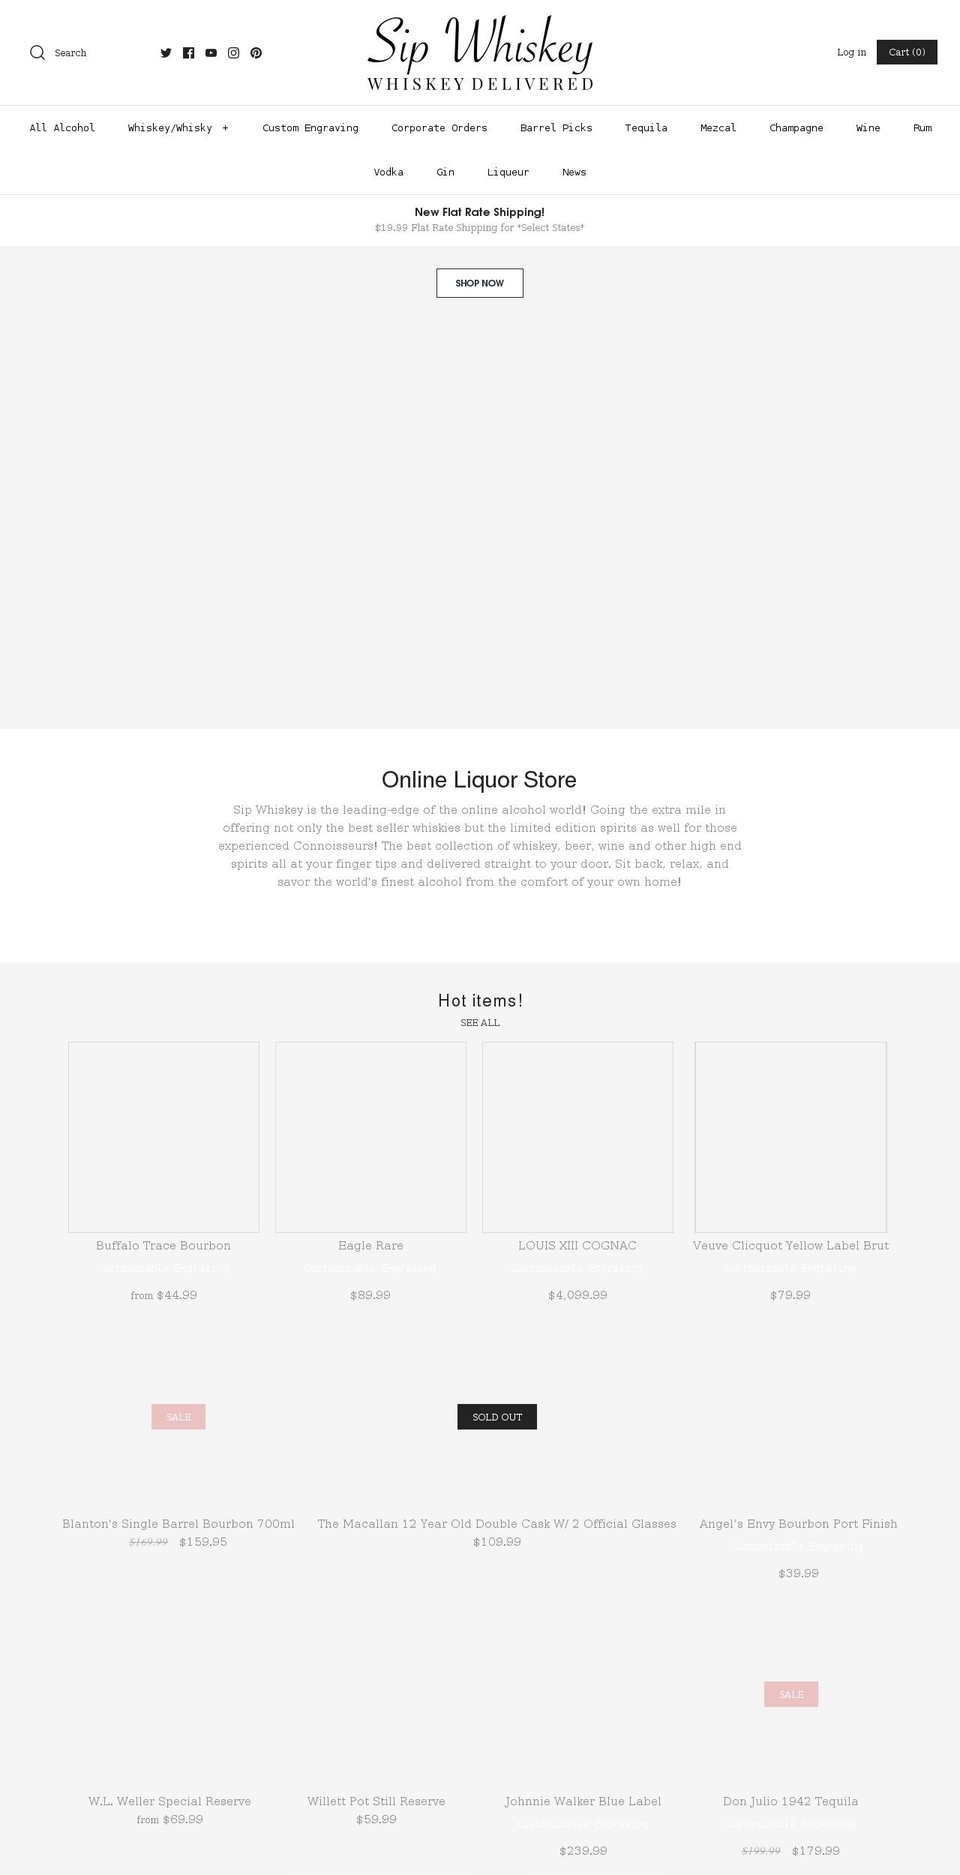 Whisk Shopify theme site example sipwhiskey.com